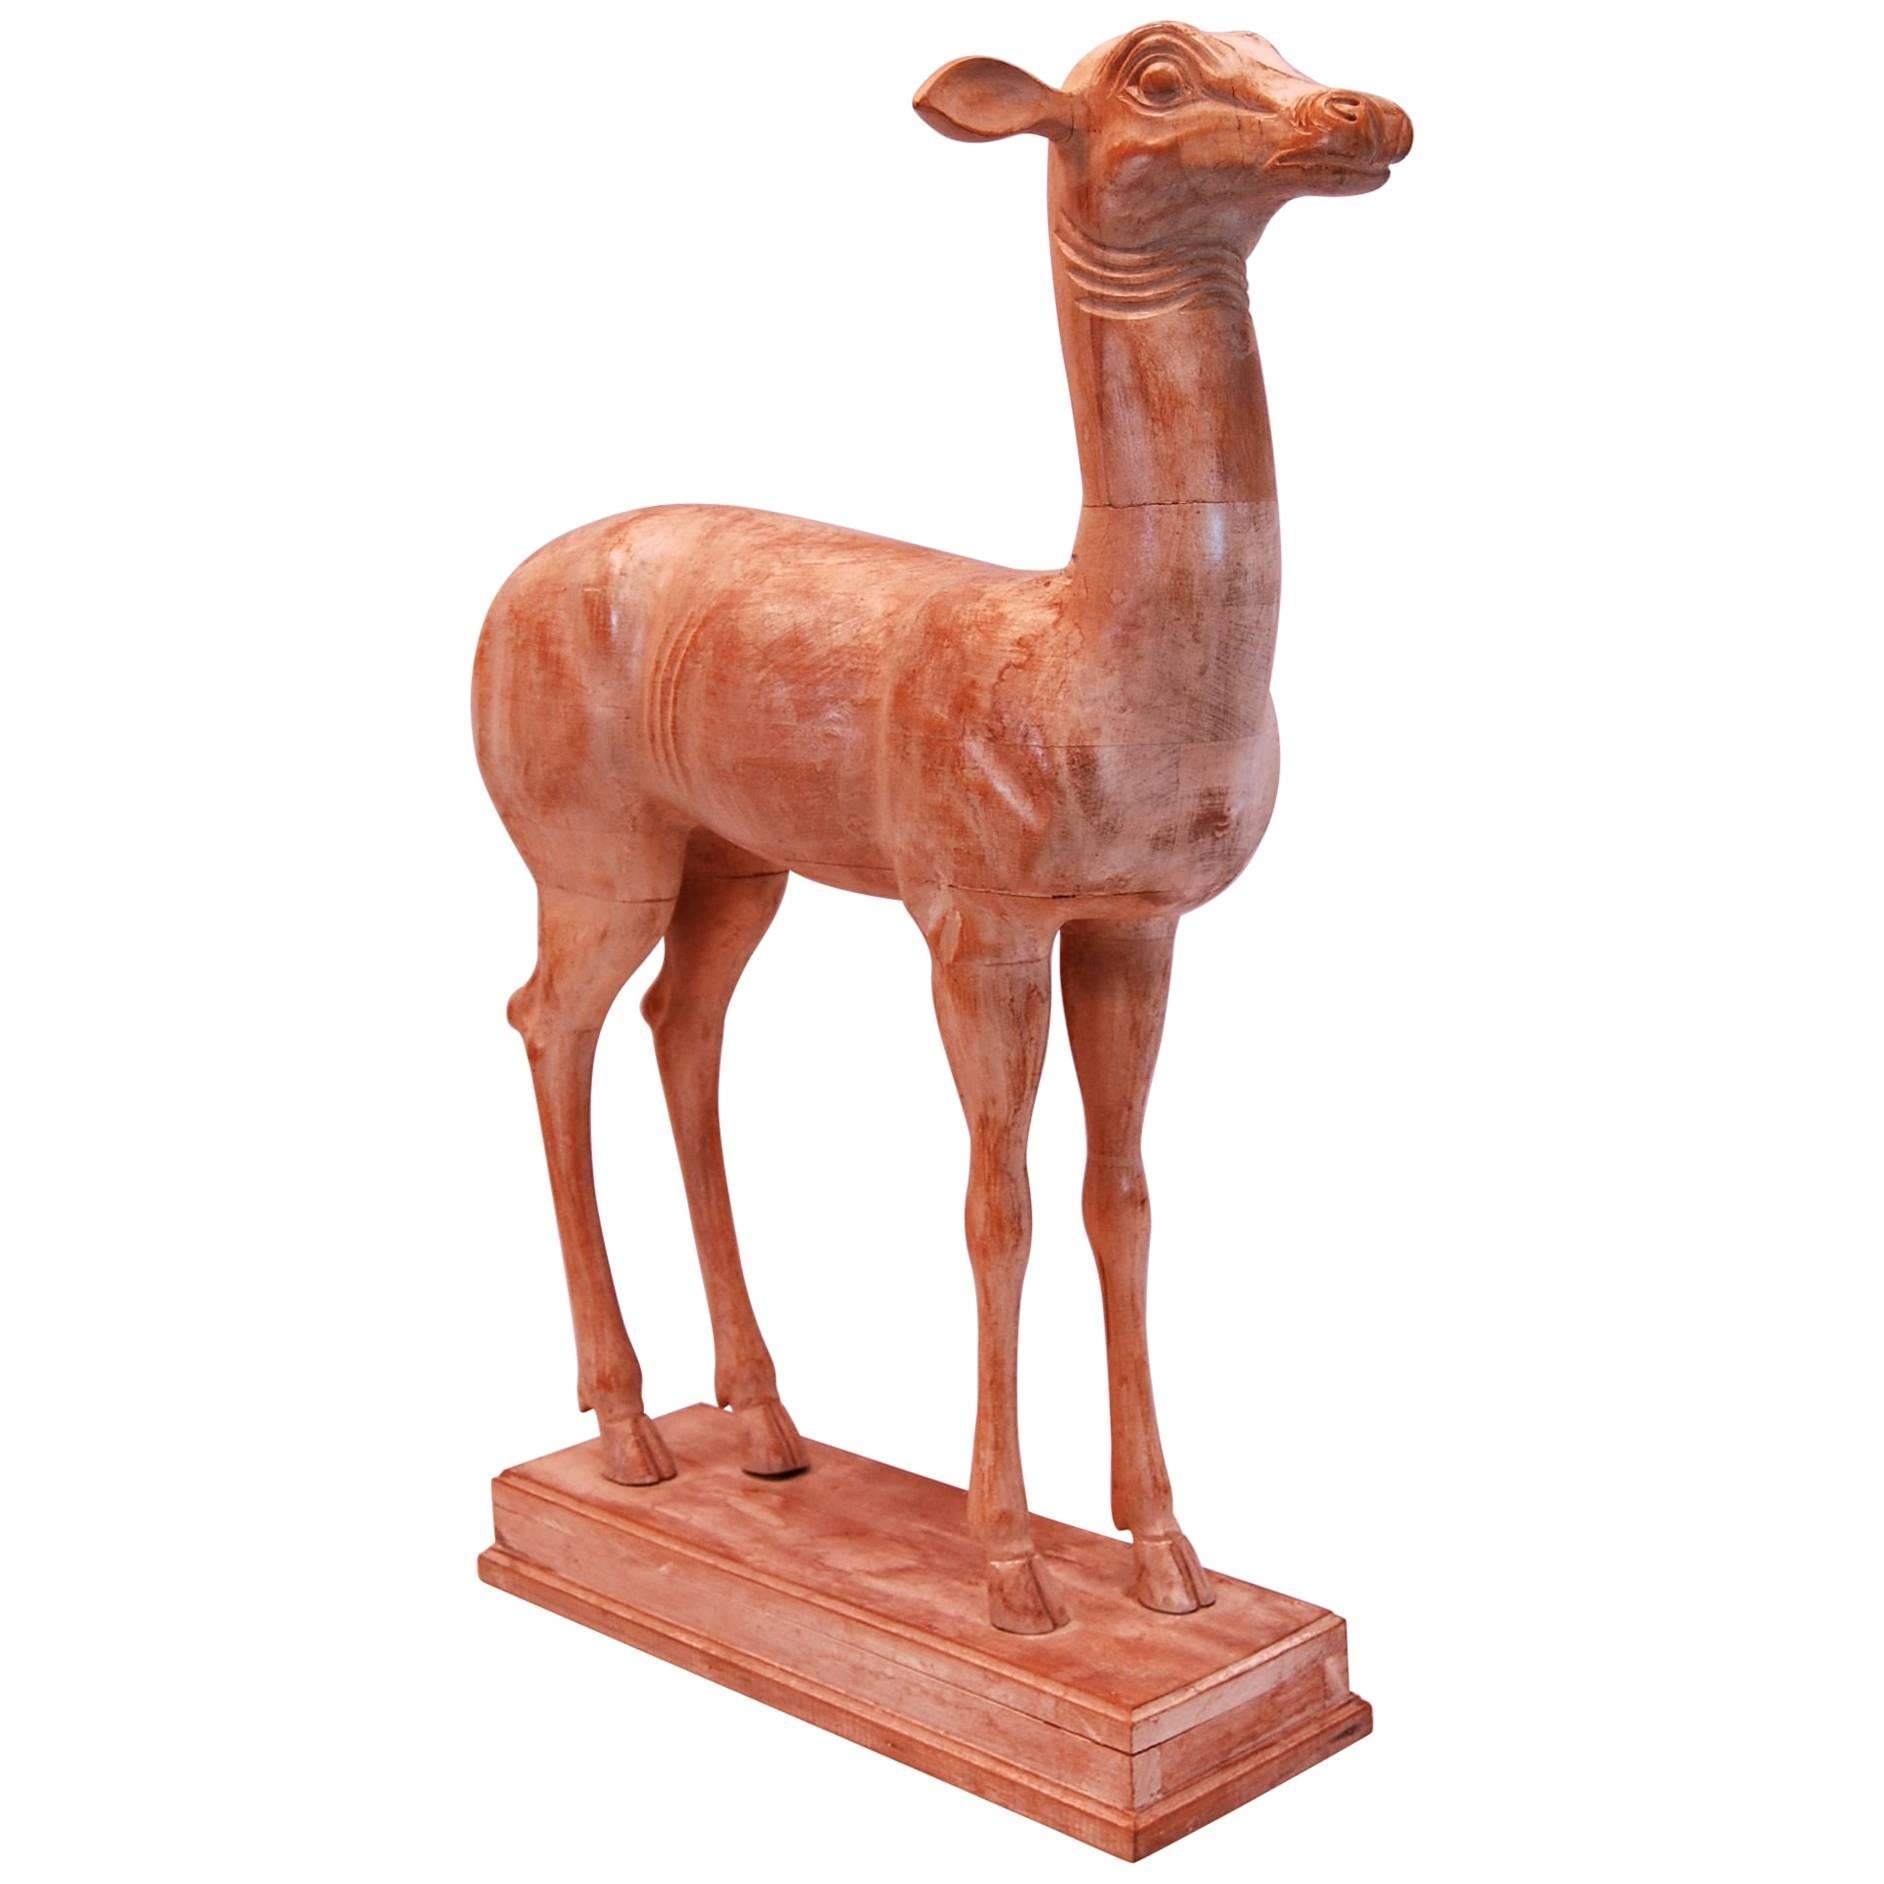 Carved Wooden Sculpture of Fallow Fawn from Pisoni's Villa at Herculaneum